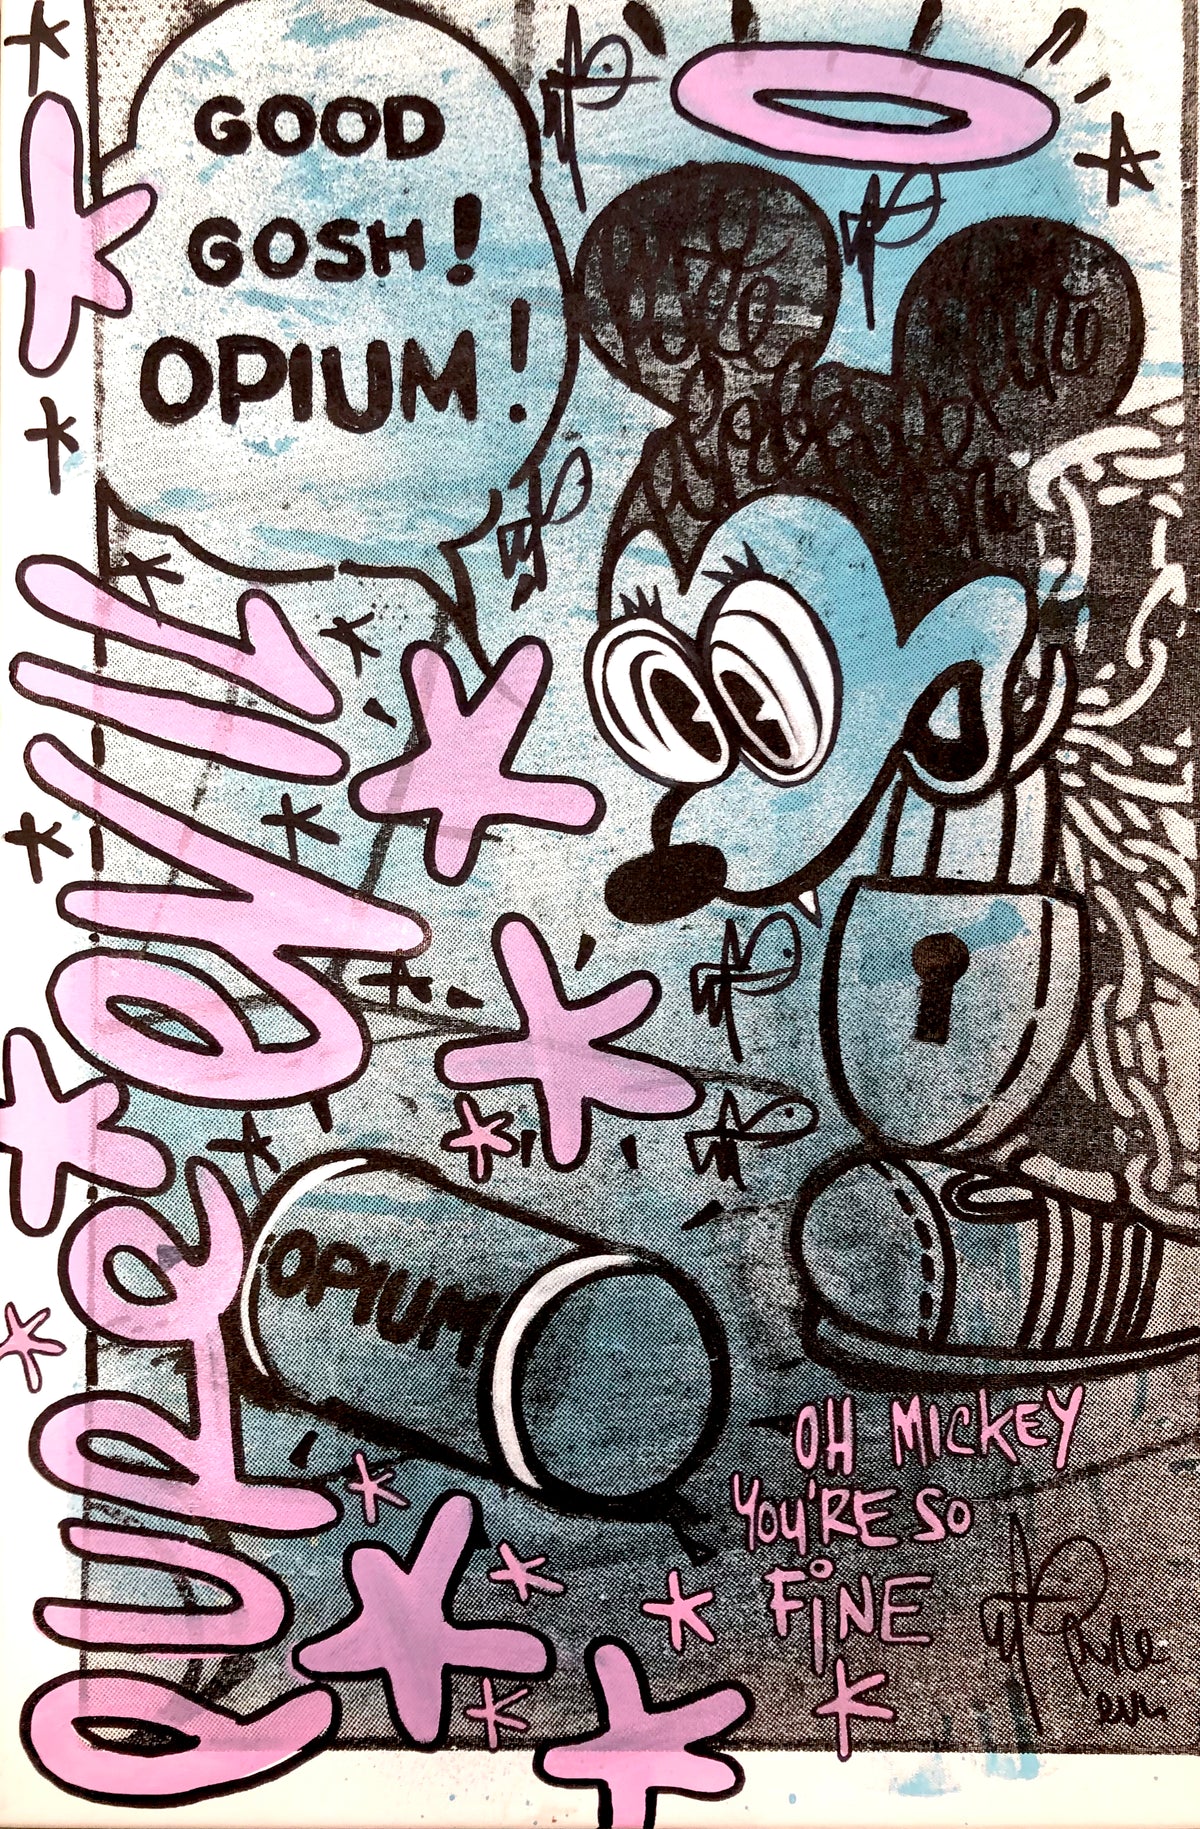 Opiummm Canvas - Oh Mickey you’re so fine by Pure Evil